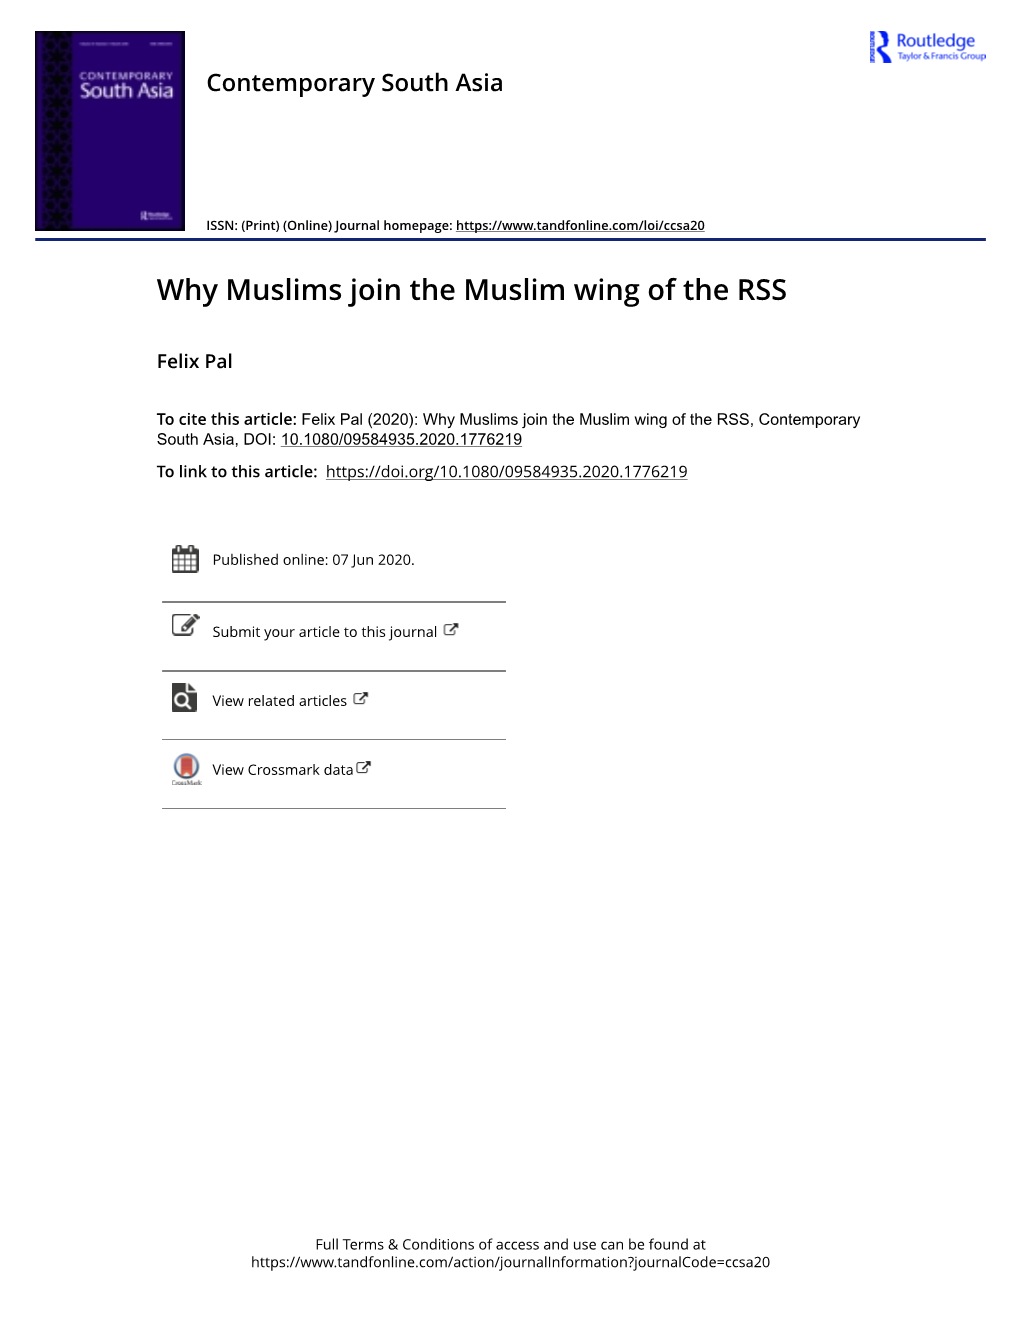 Why Muslims Join the Muslim Wing of the RSS